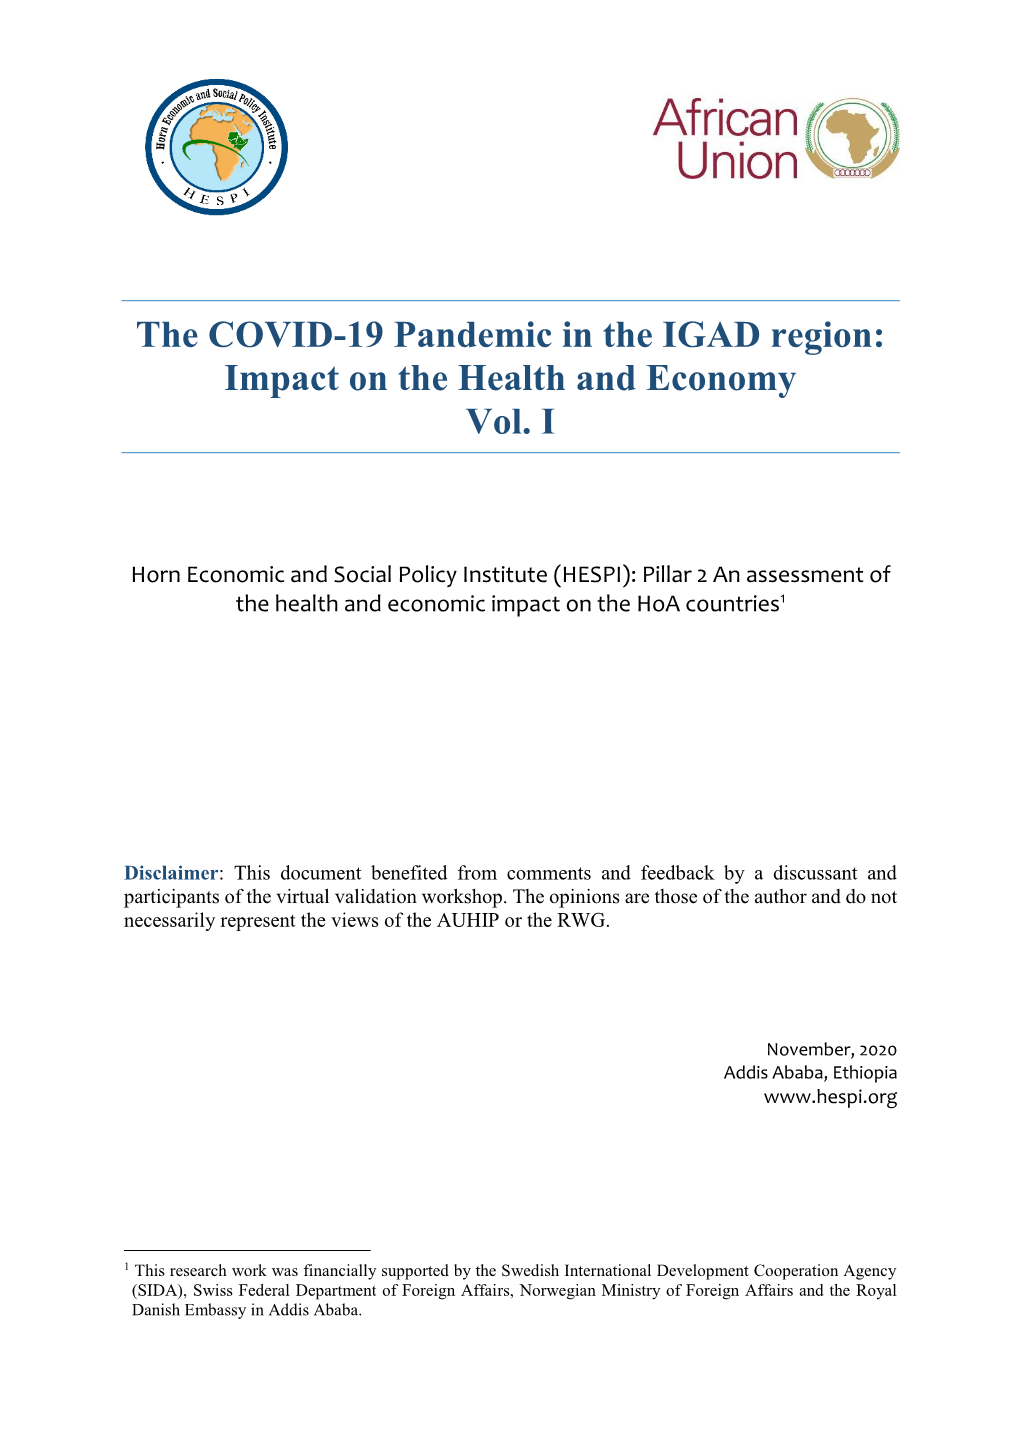 The COVID-19 Pandemic in the IGAD Region: Impact on the Health and Economy Vol